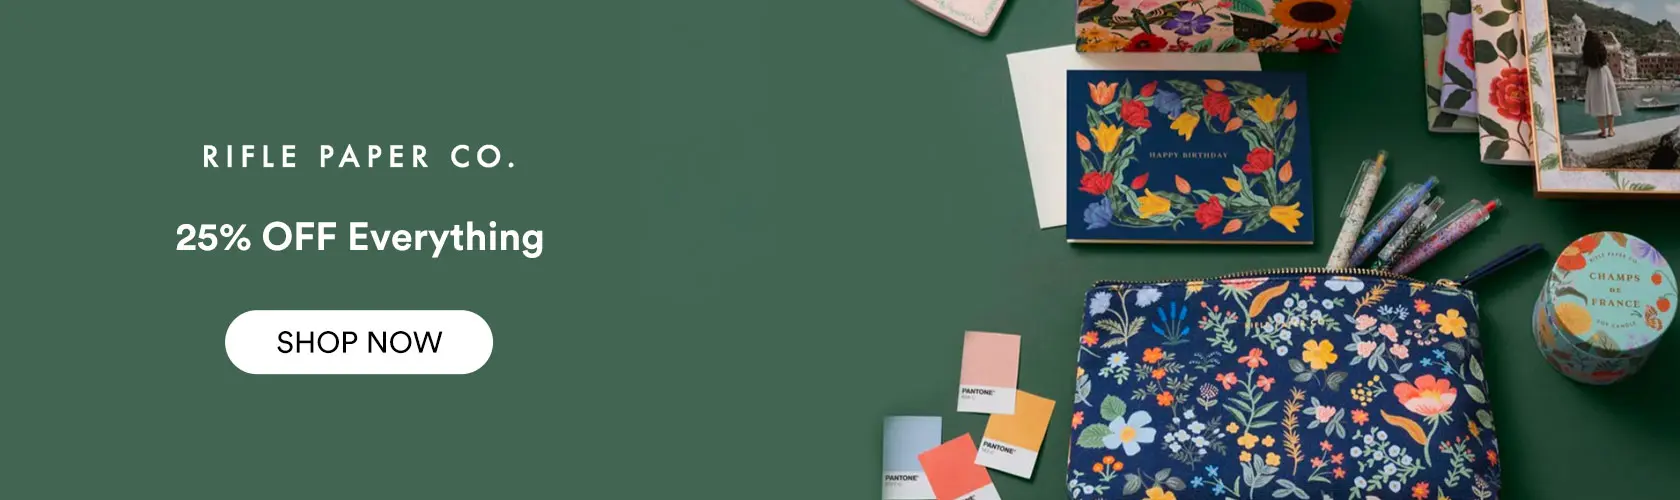 Rifle Paper Co US: 25% OFF Everything